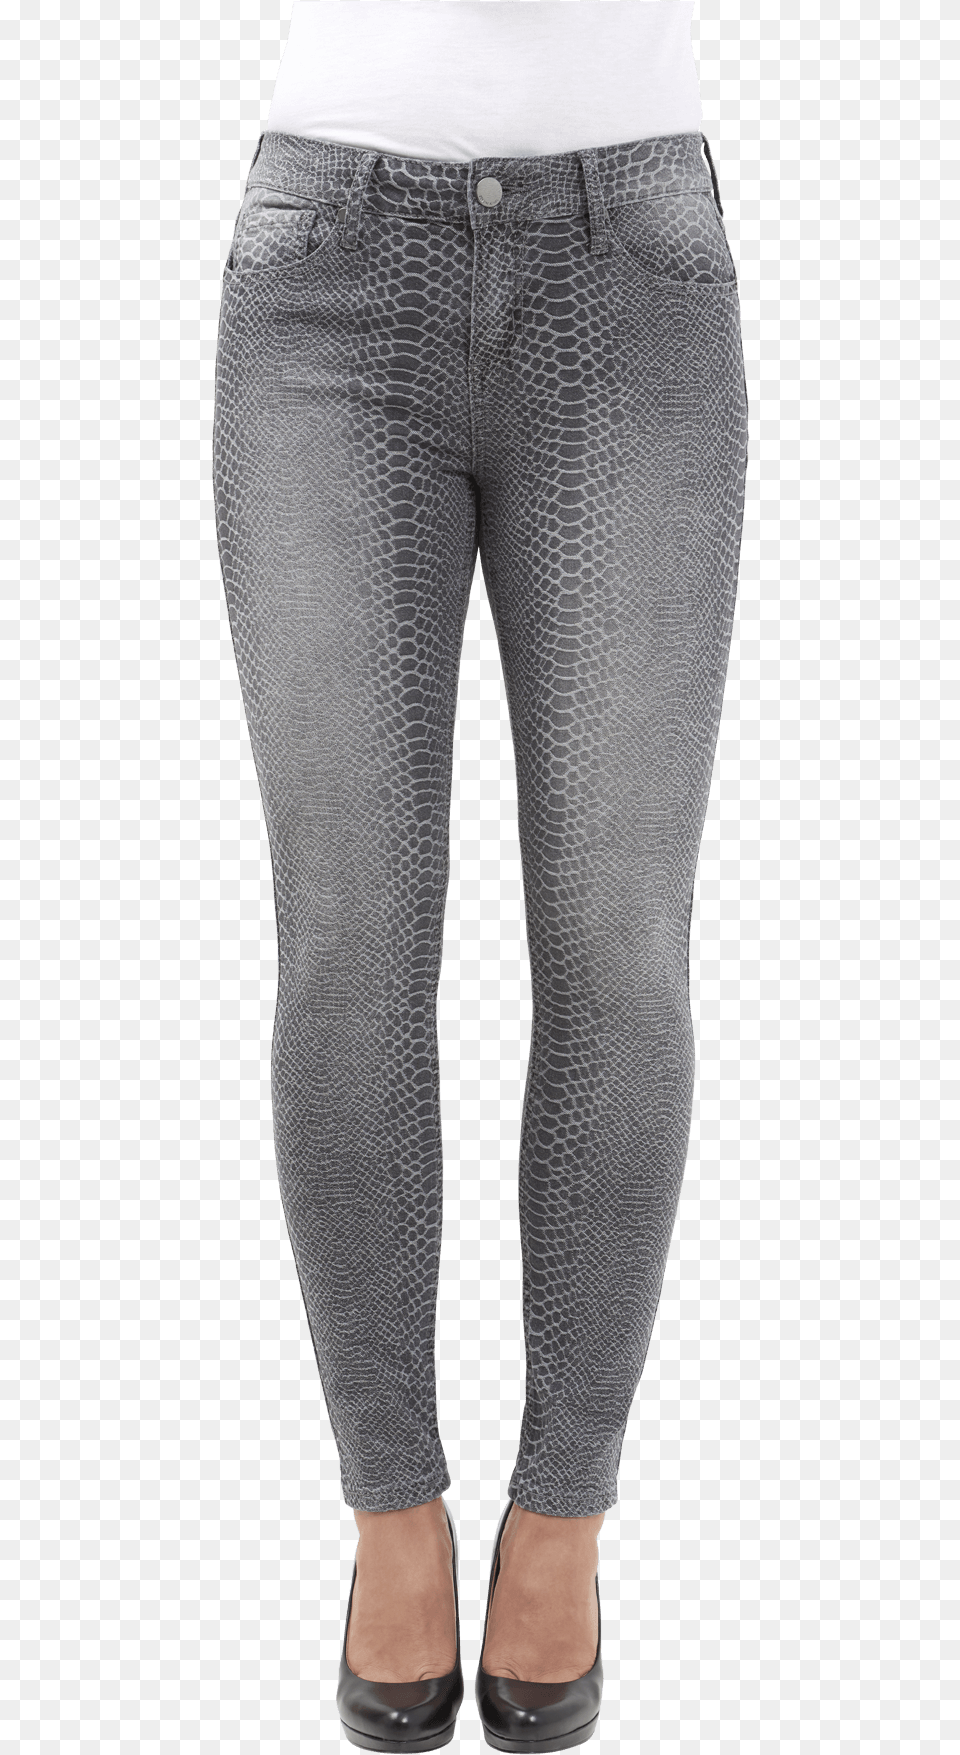 Seven 7 Jacquard Skinny Jeans Leggings, Clothing, Pants, Armor, Chain Mail Png